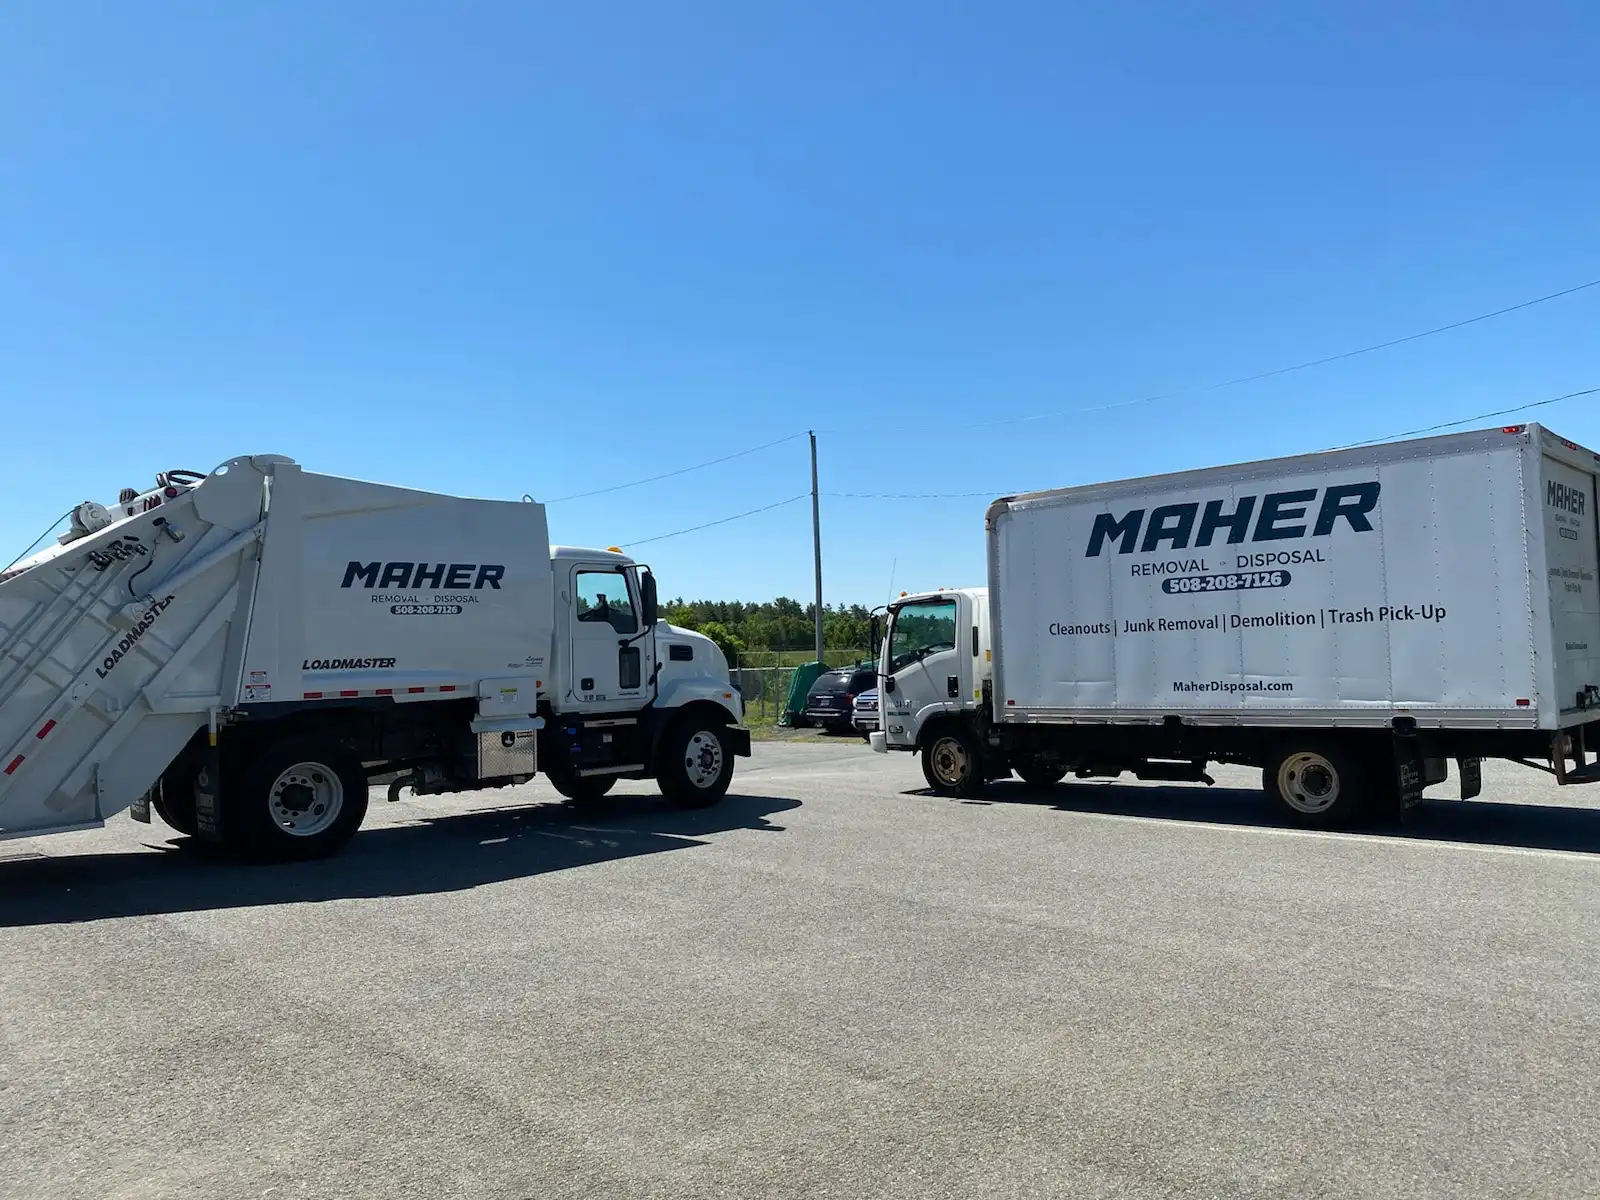 Maher Removal & Disposal is a Trash Pickup & Junk Removal company in Hingham, MA